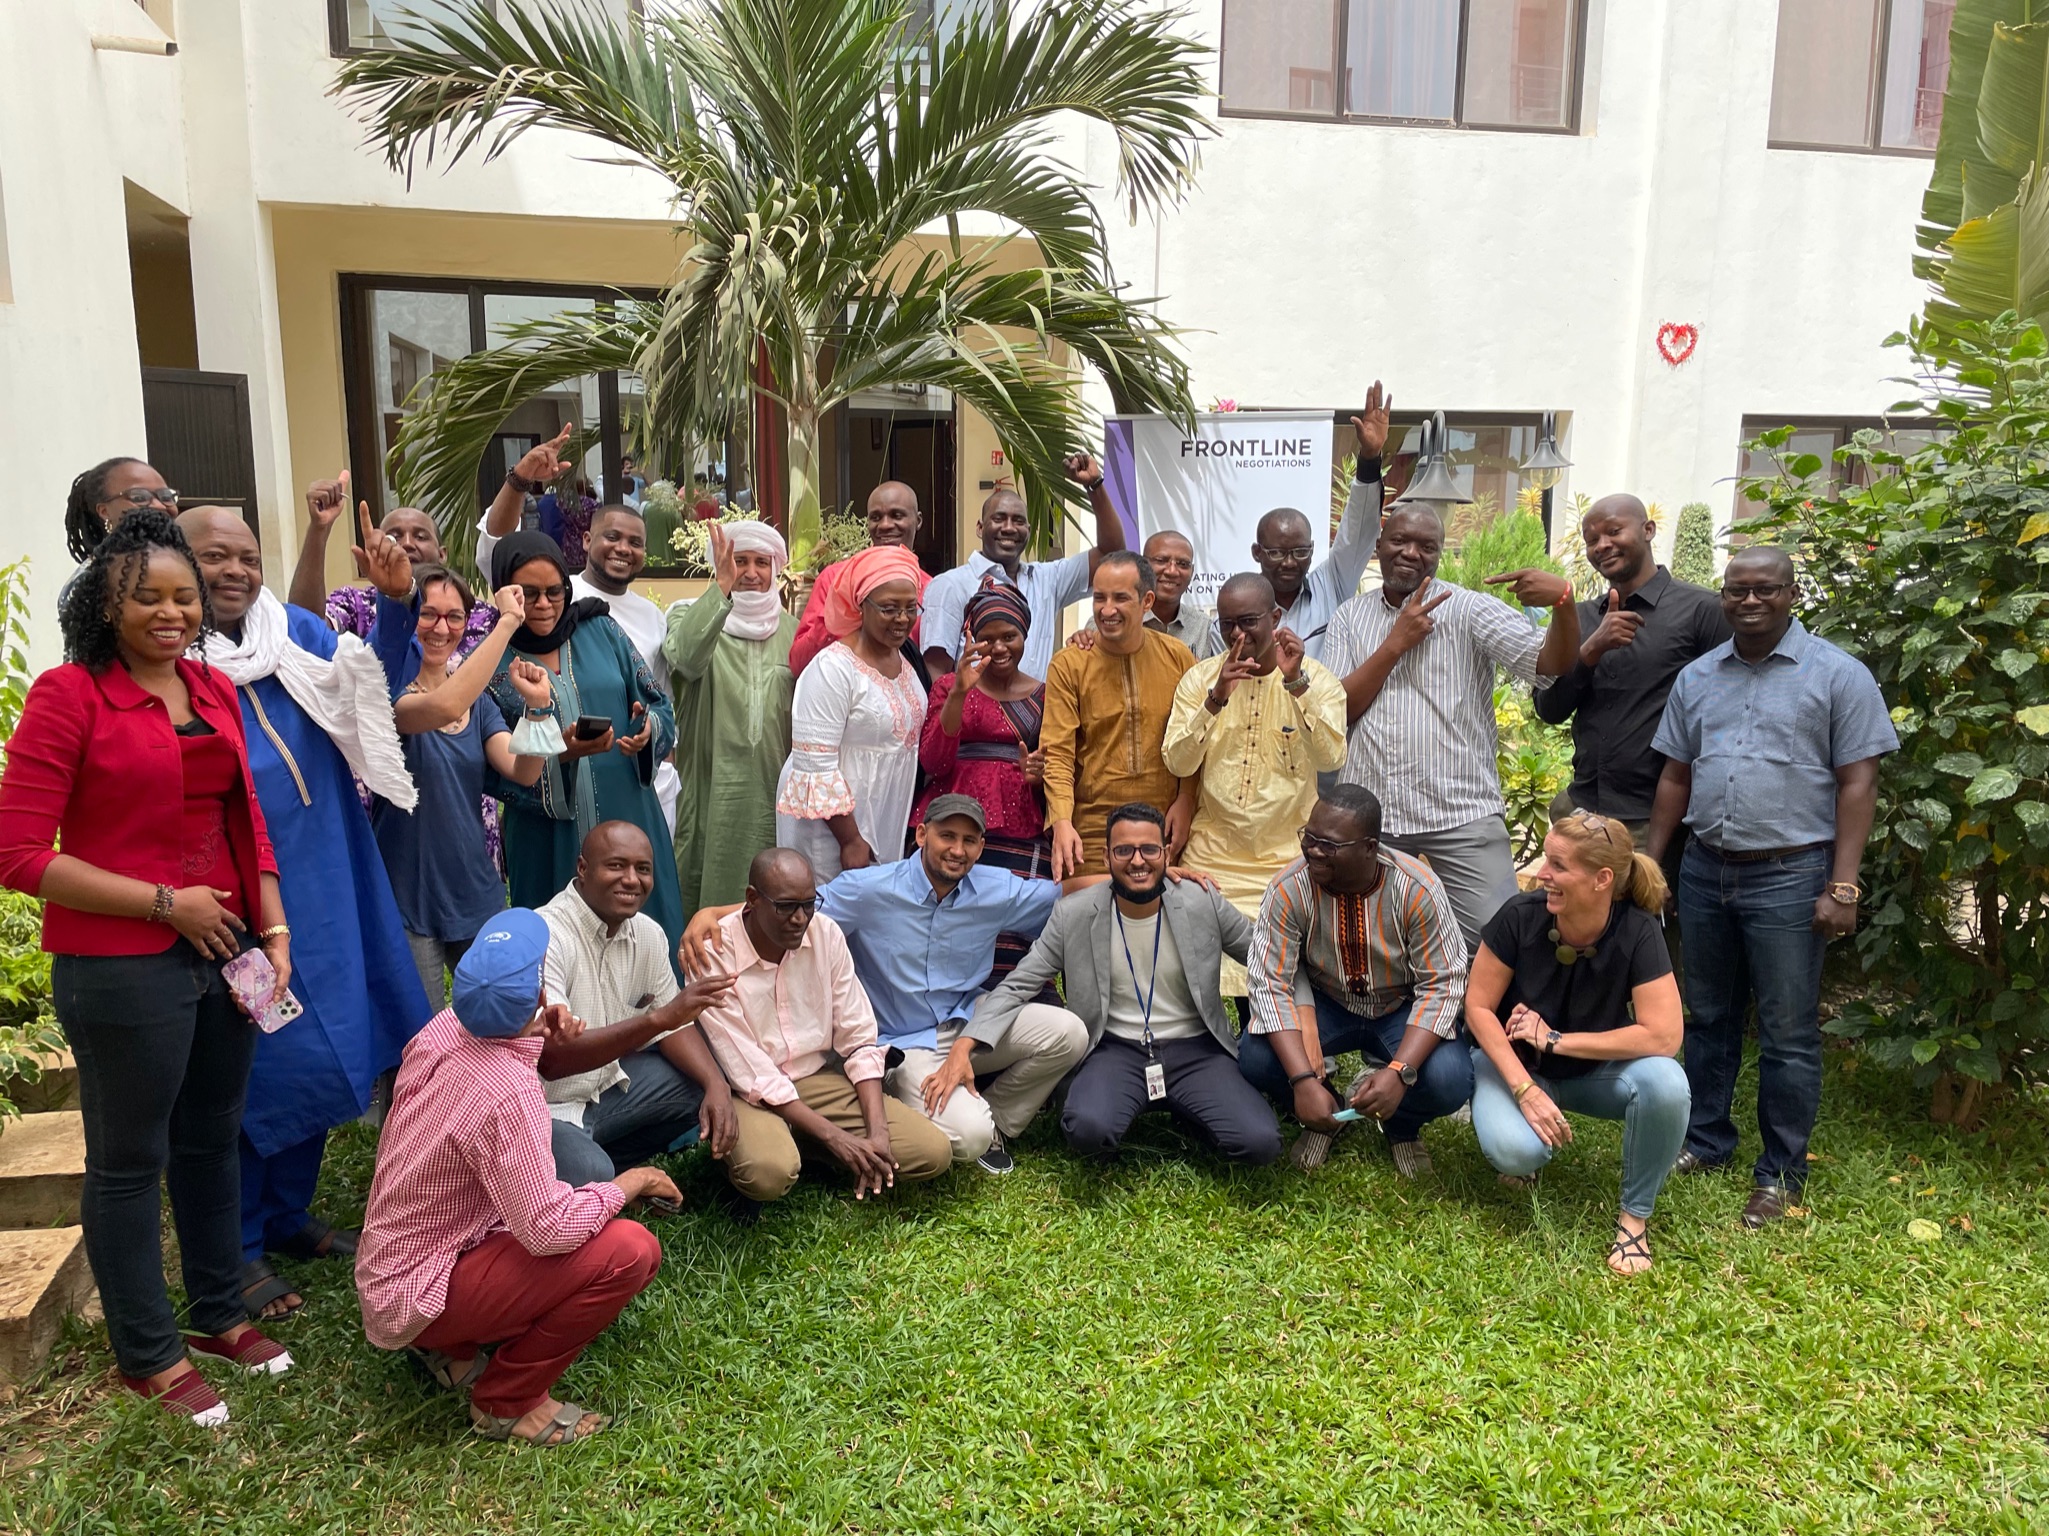 Humanitarian professionals working in the Sahel region stand outside a building for a group photo. They are helping their peers develop their negotiation skills through workshops.